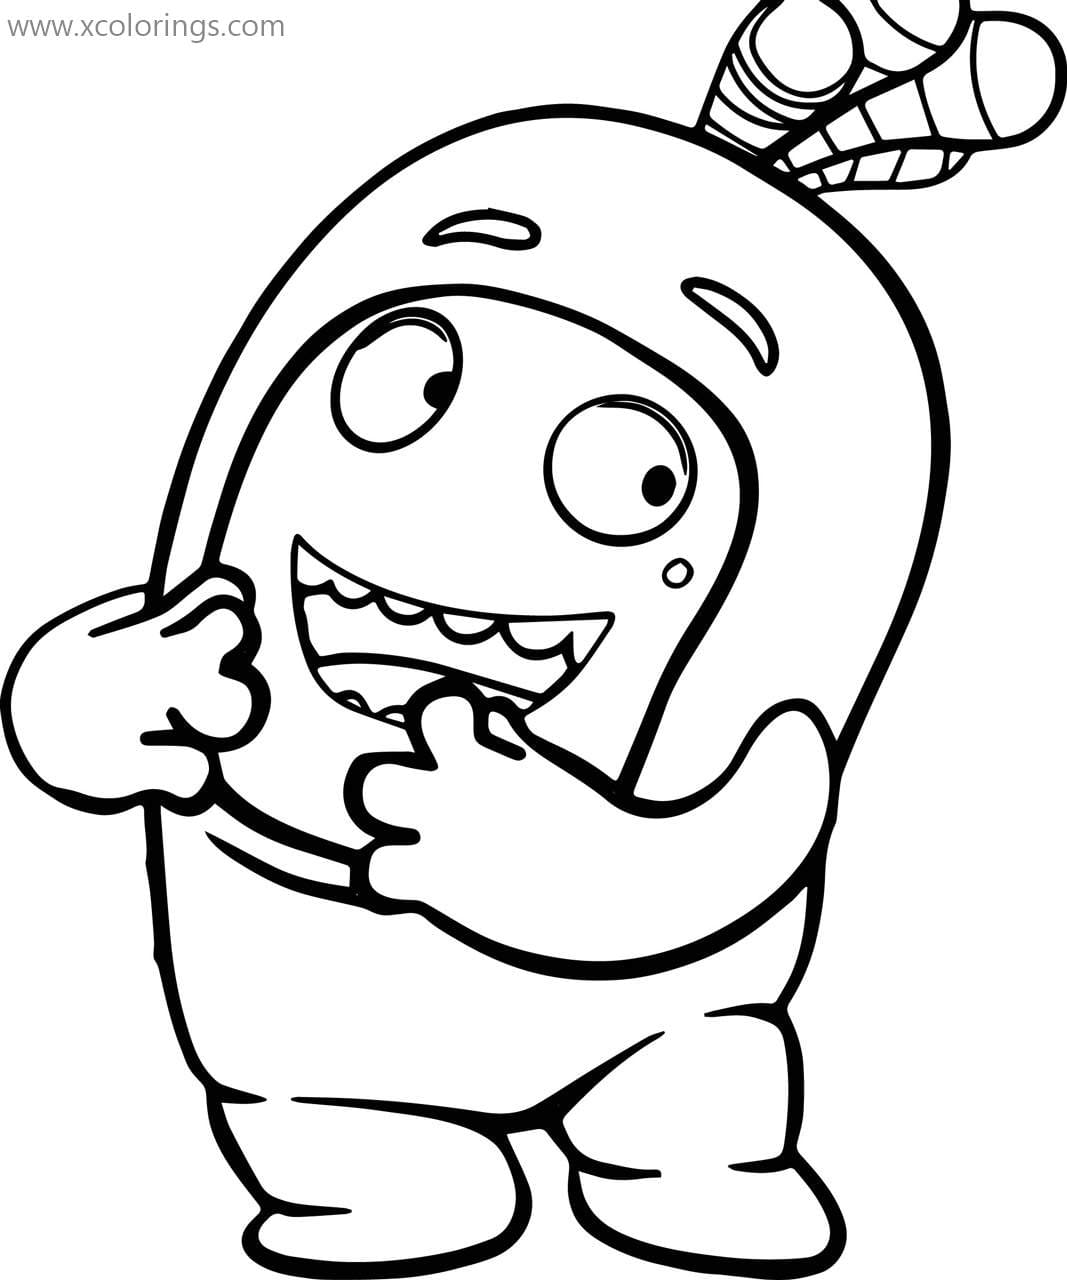 Bubbles From Oddbods Image Coloring Page